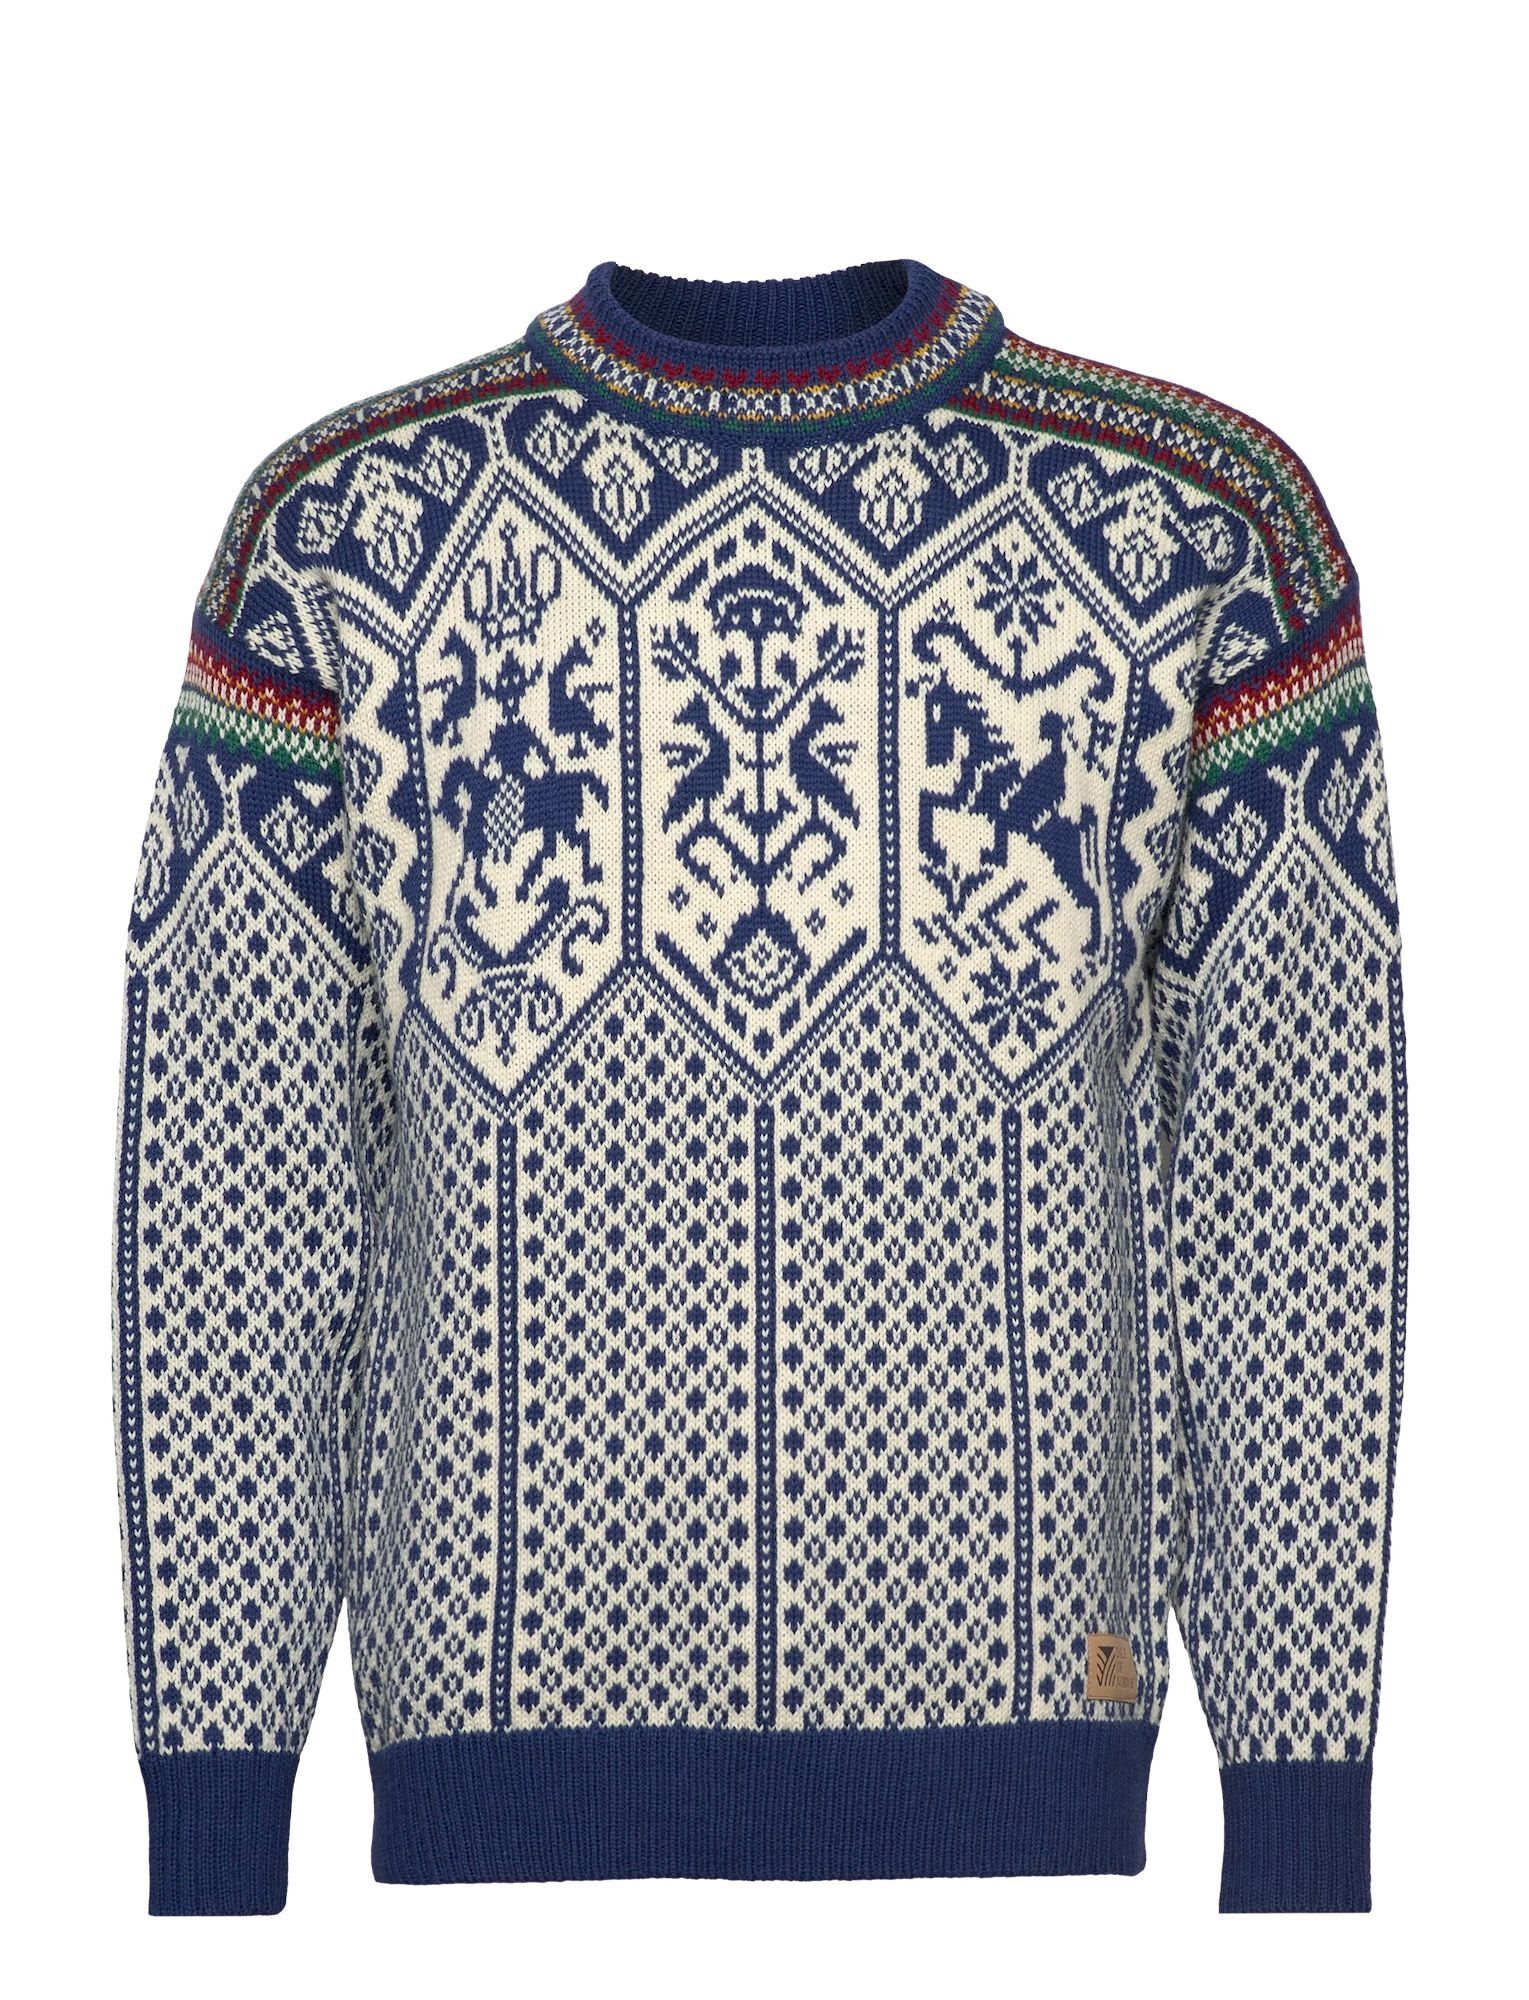 Dale of Norway 1994 Lillehammer Sweater - Pánsky pullover | Hardloop